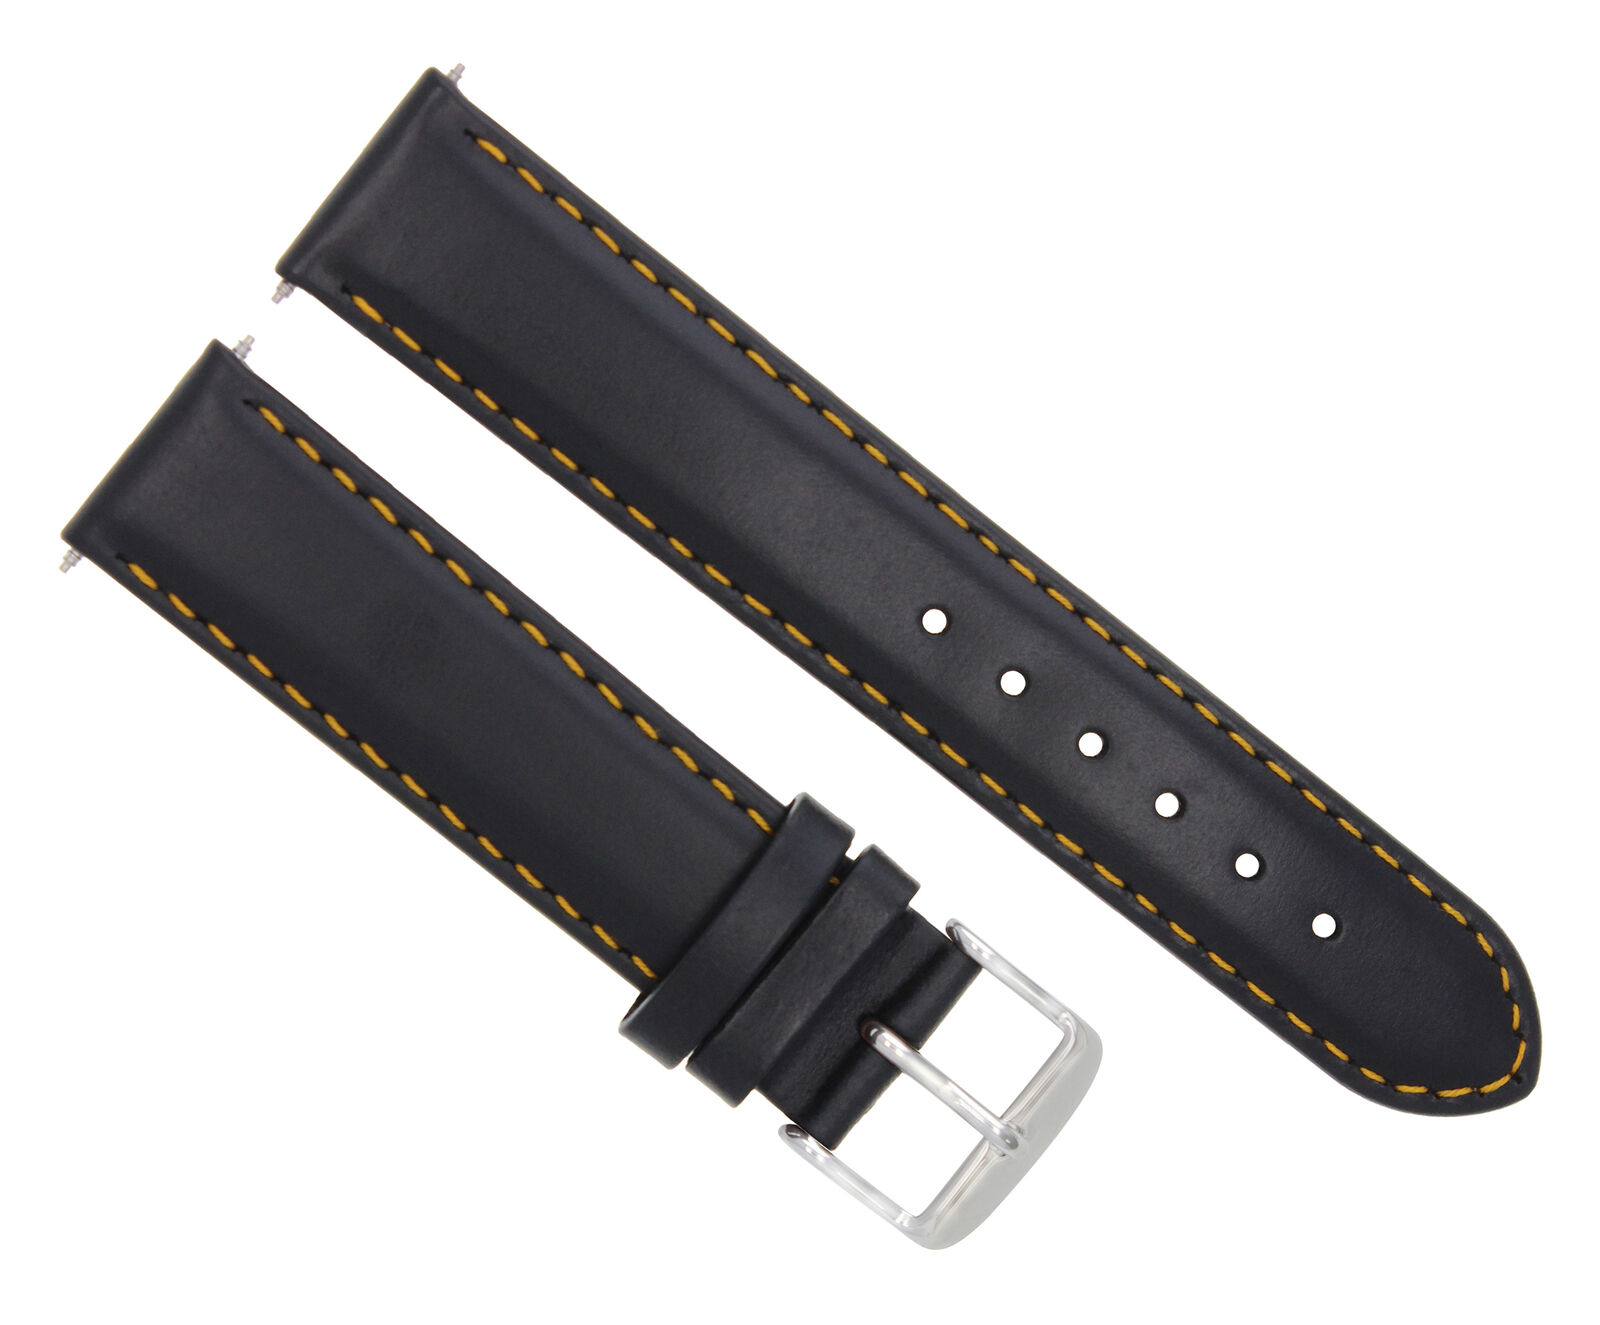 18MM SMOOTH LEATHER WATCH STRAP BAND BRACELET FOR MONTBLANC WATCH BLACK OS